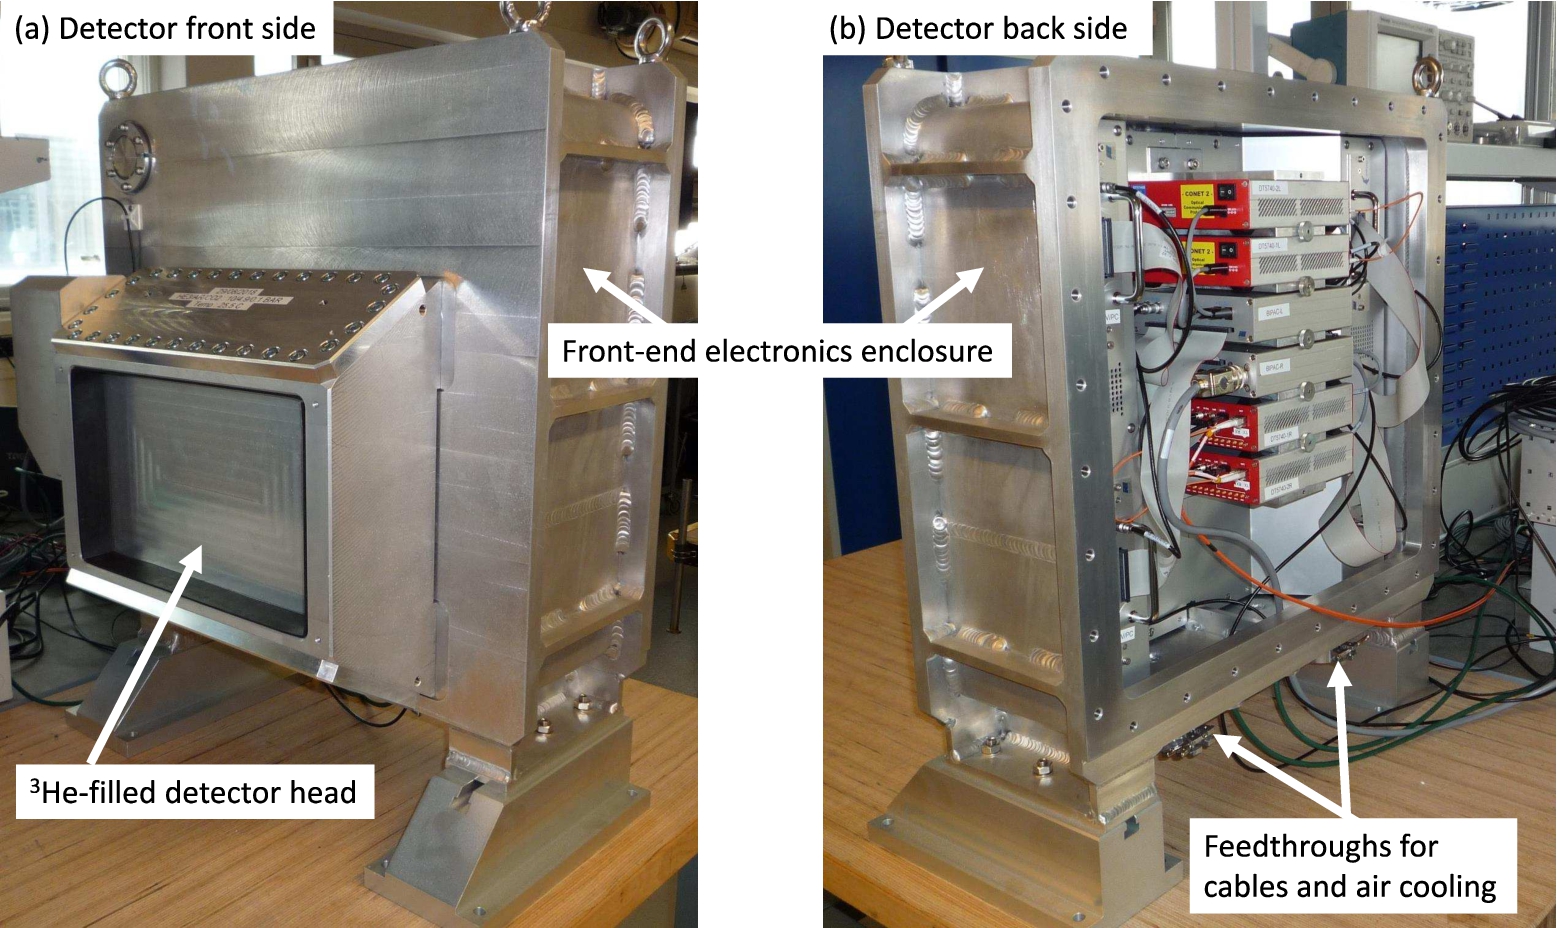 Photograph of the PLATYPUS MAM detector system showing the 3He-filled detector head (a) and the front-end electronics enclosure (b).